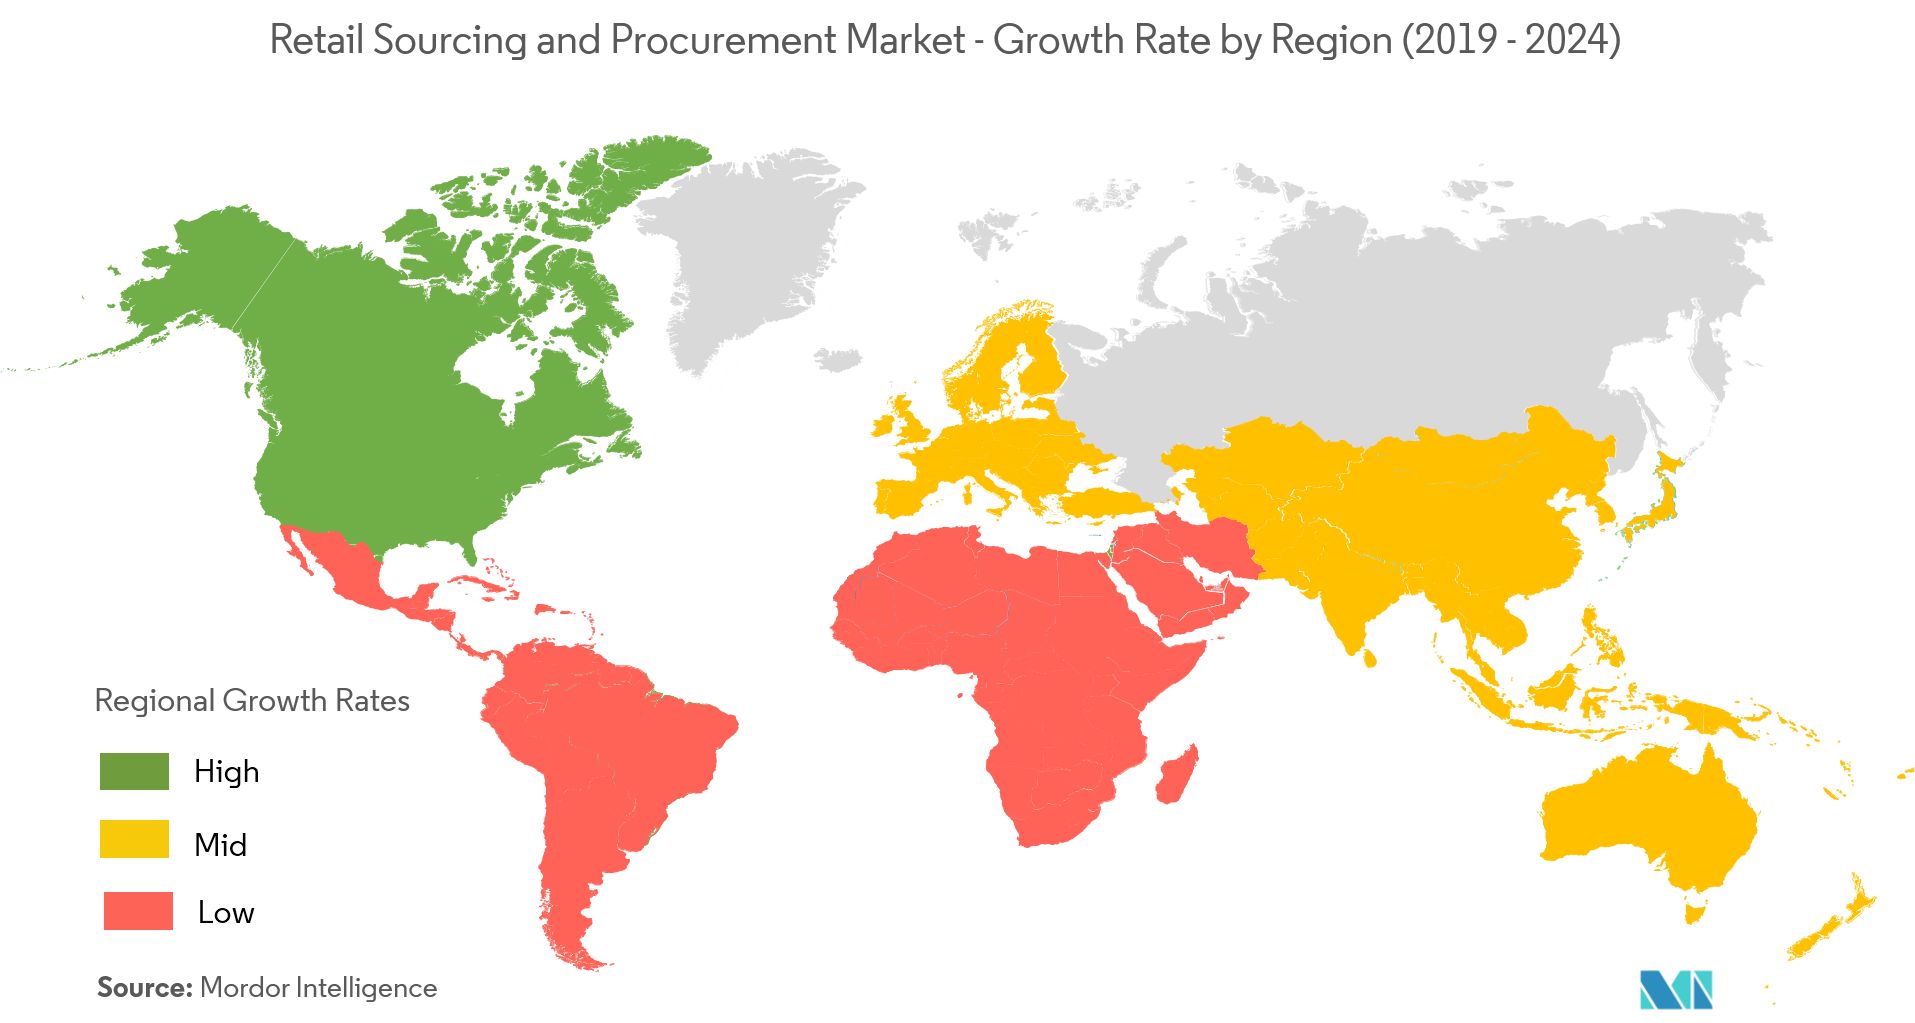 Retail Sourcing and Procurement Market Growth